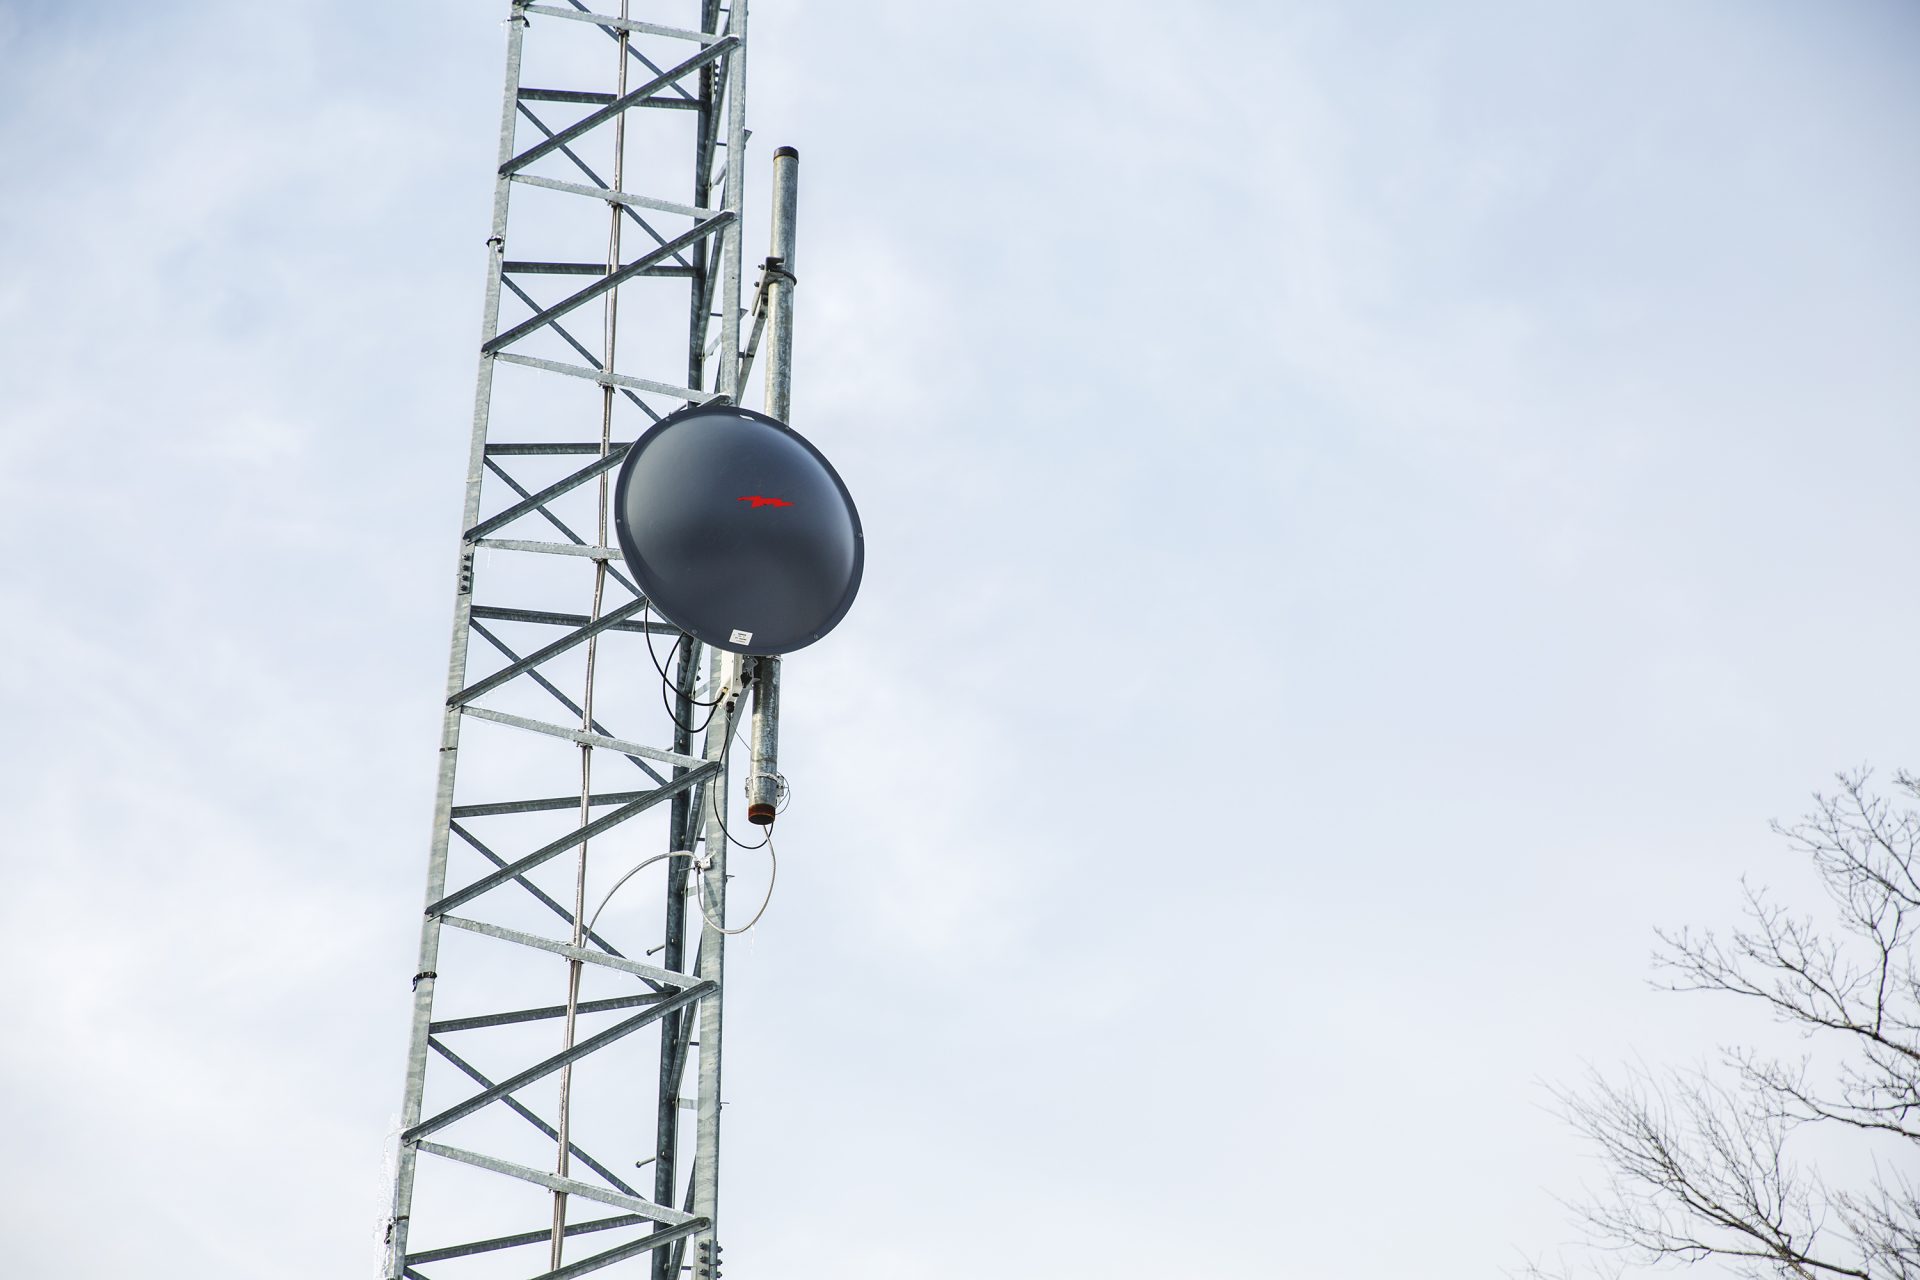 This specific receiver mounted on the radio tower points at another radio dish at Allensville, where a nearby fibre optic network turns into radio signal.